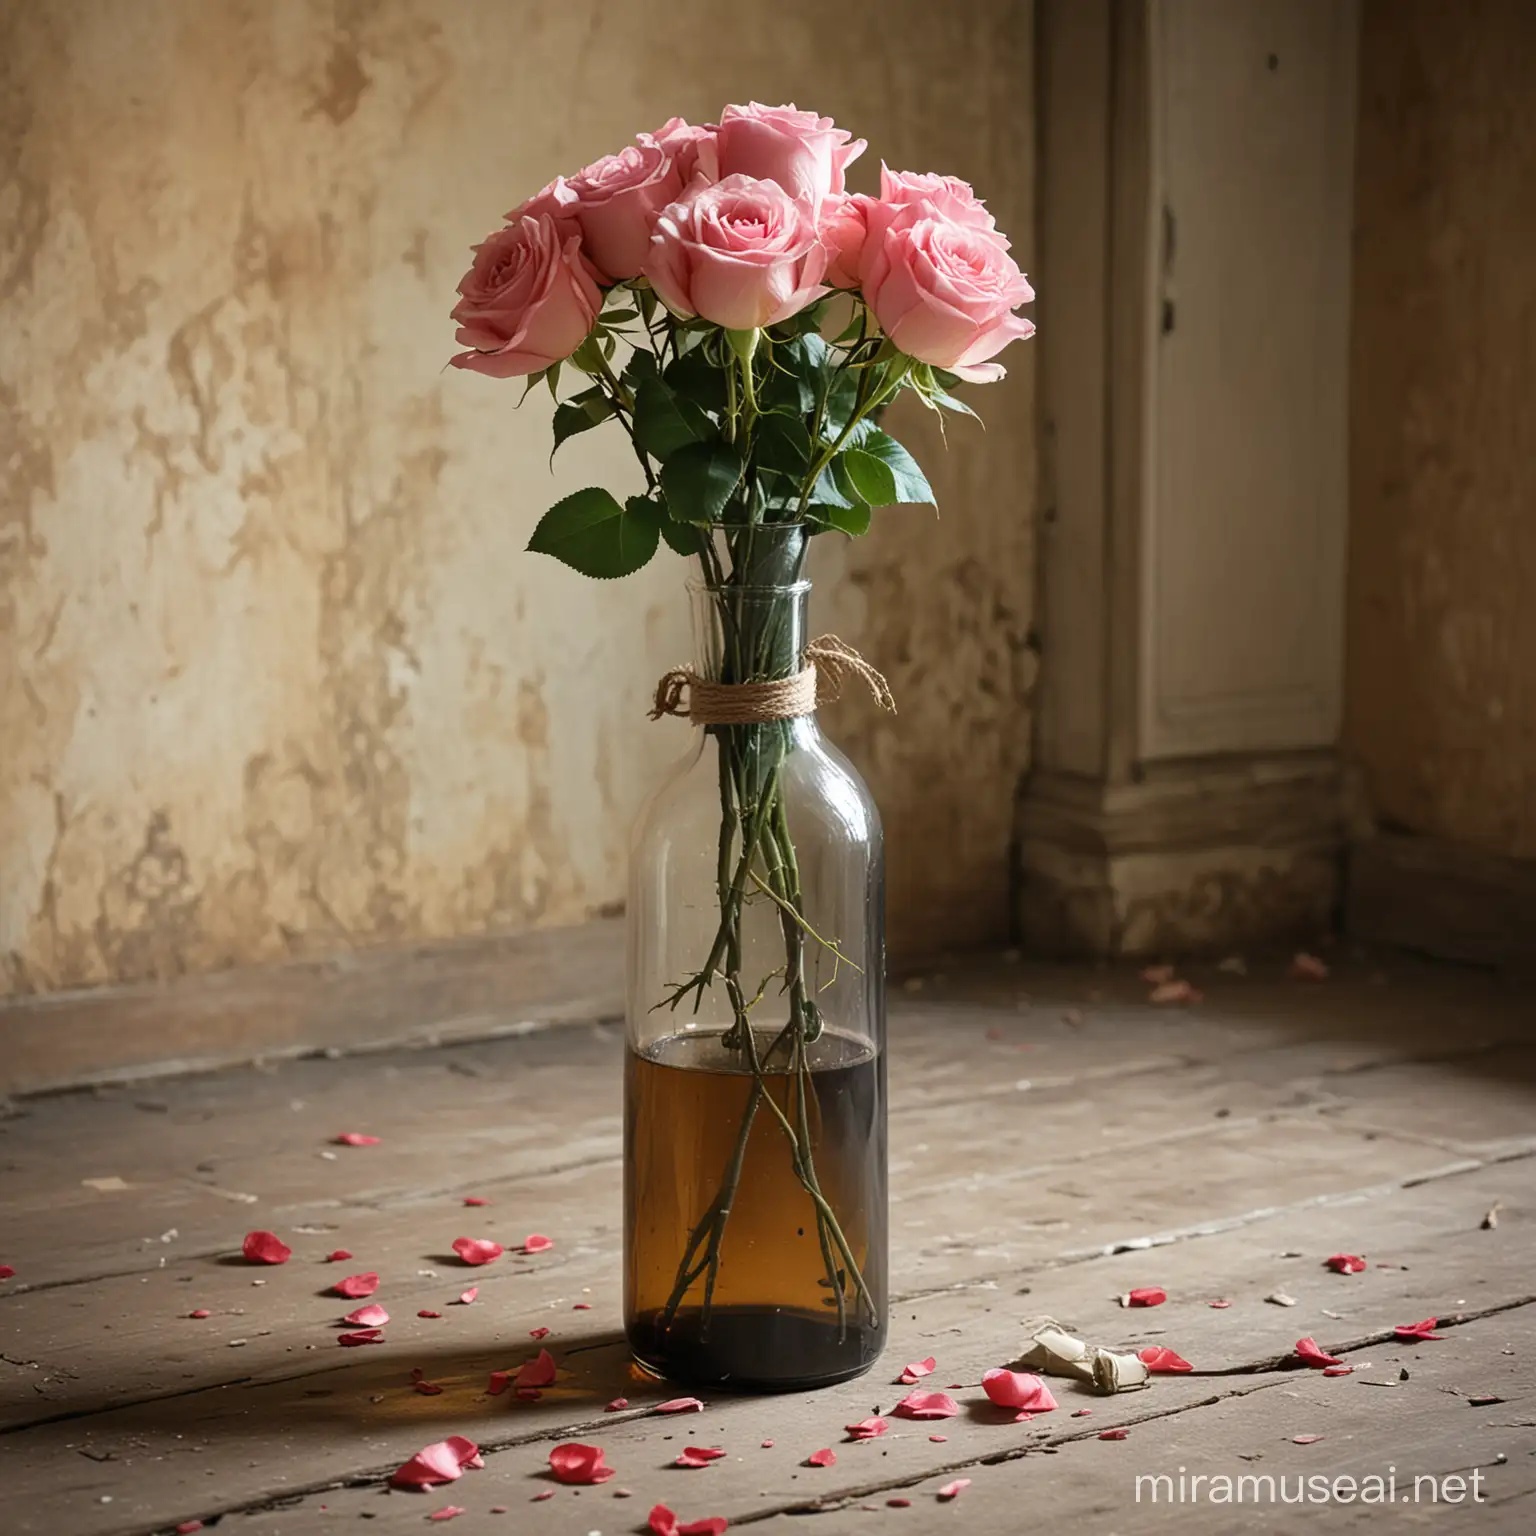 Vintage Bottle with Roses in an Antique Room